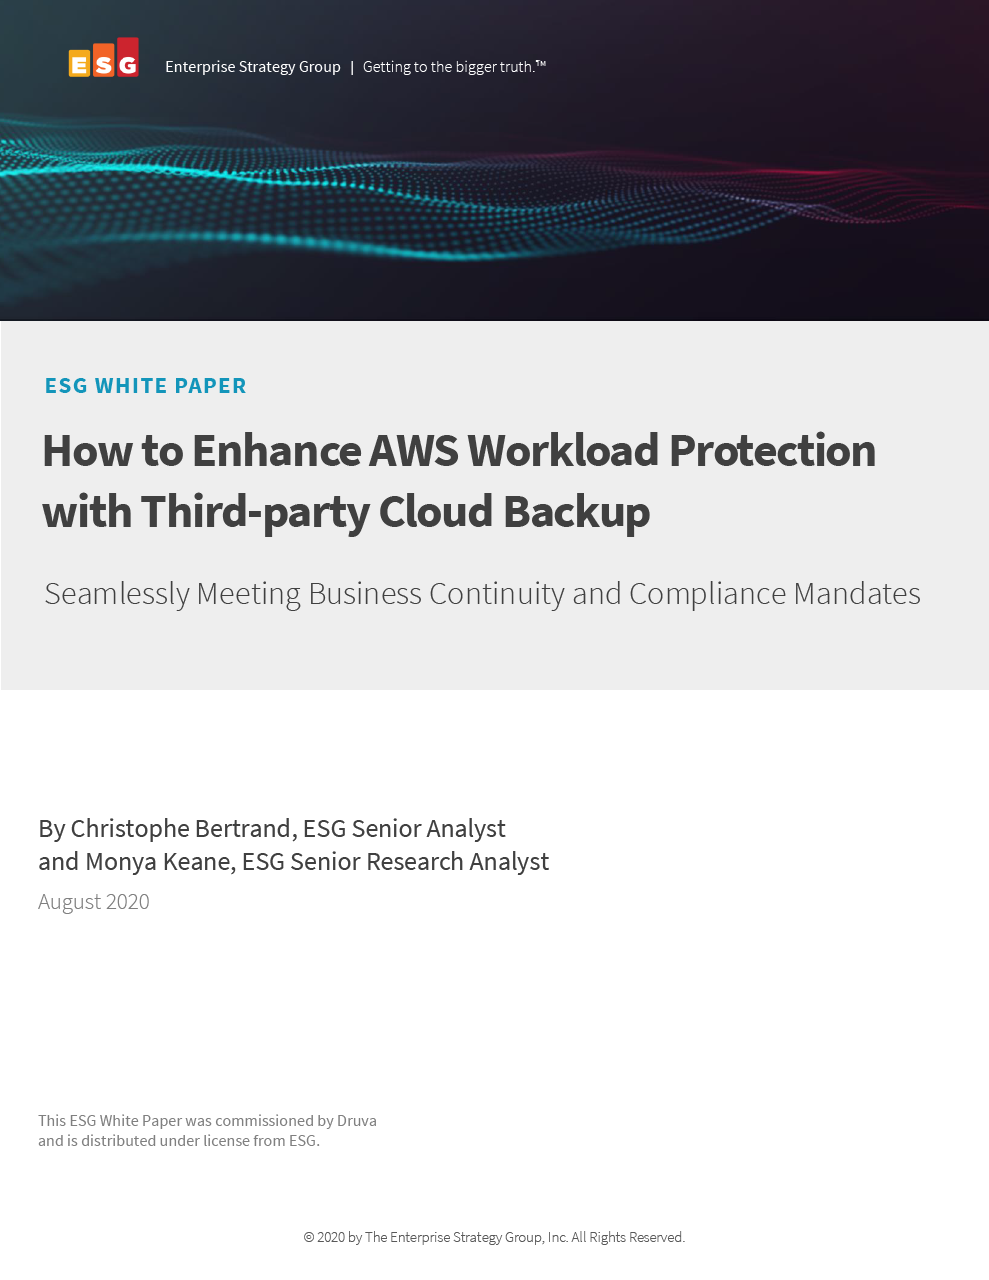 How to enhance AWS workload protection with third-party cloud backup